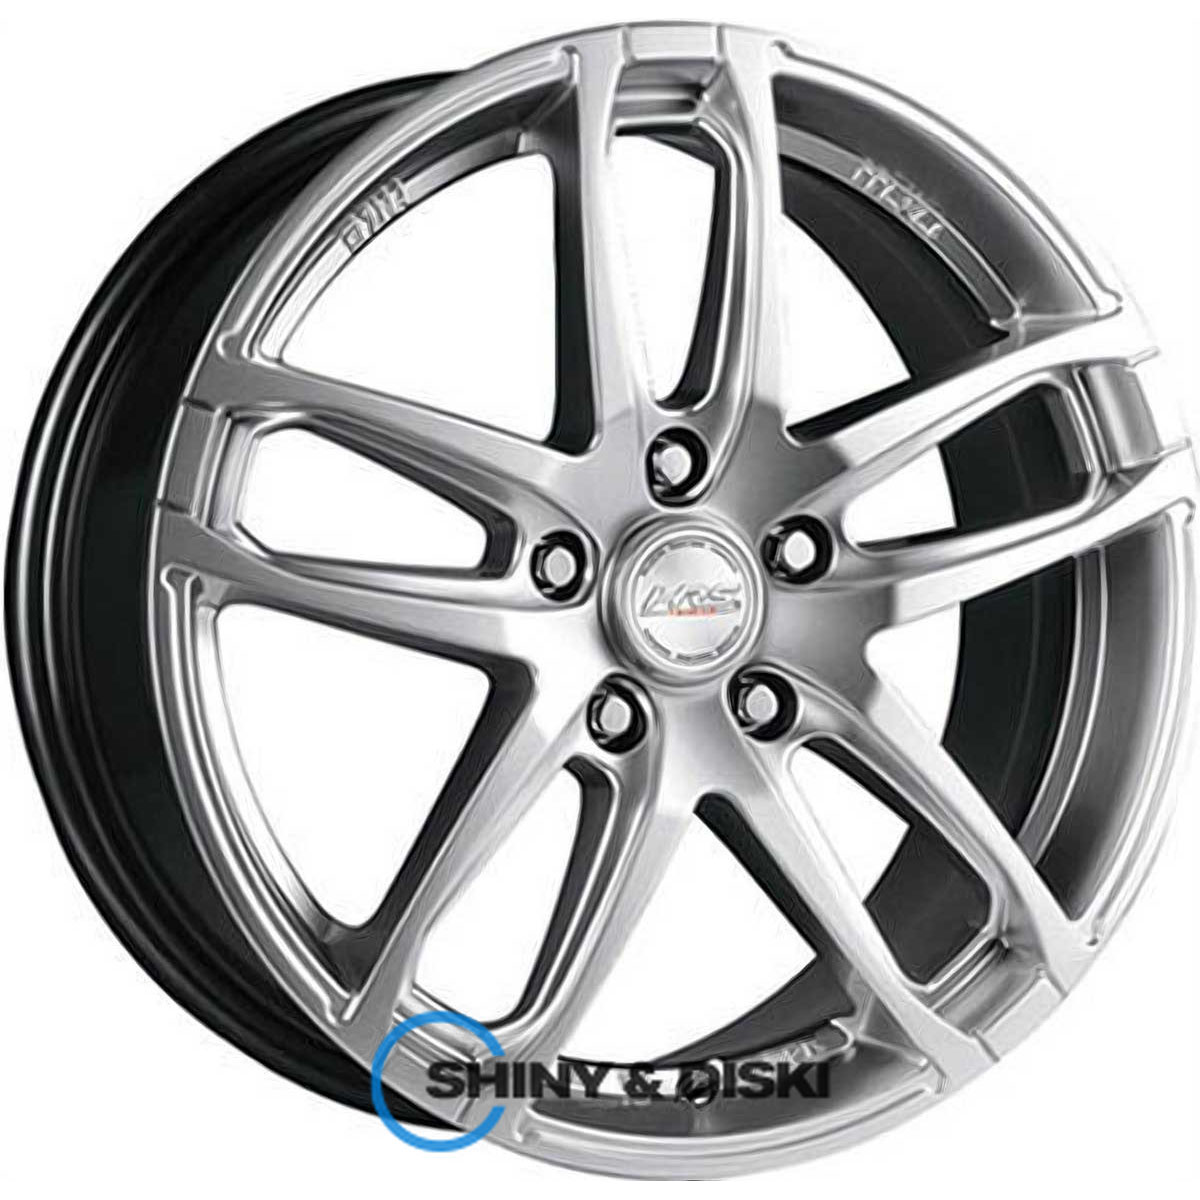 rs tuning h-495 ddnfp r16 w7 pcd4x114.3 et40 dia73.1